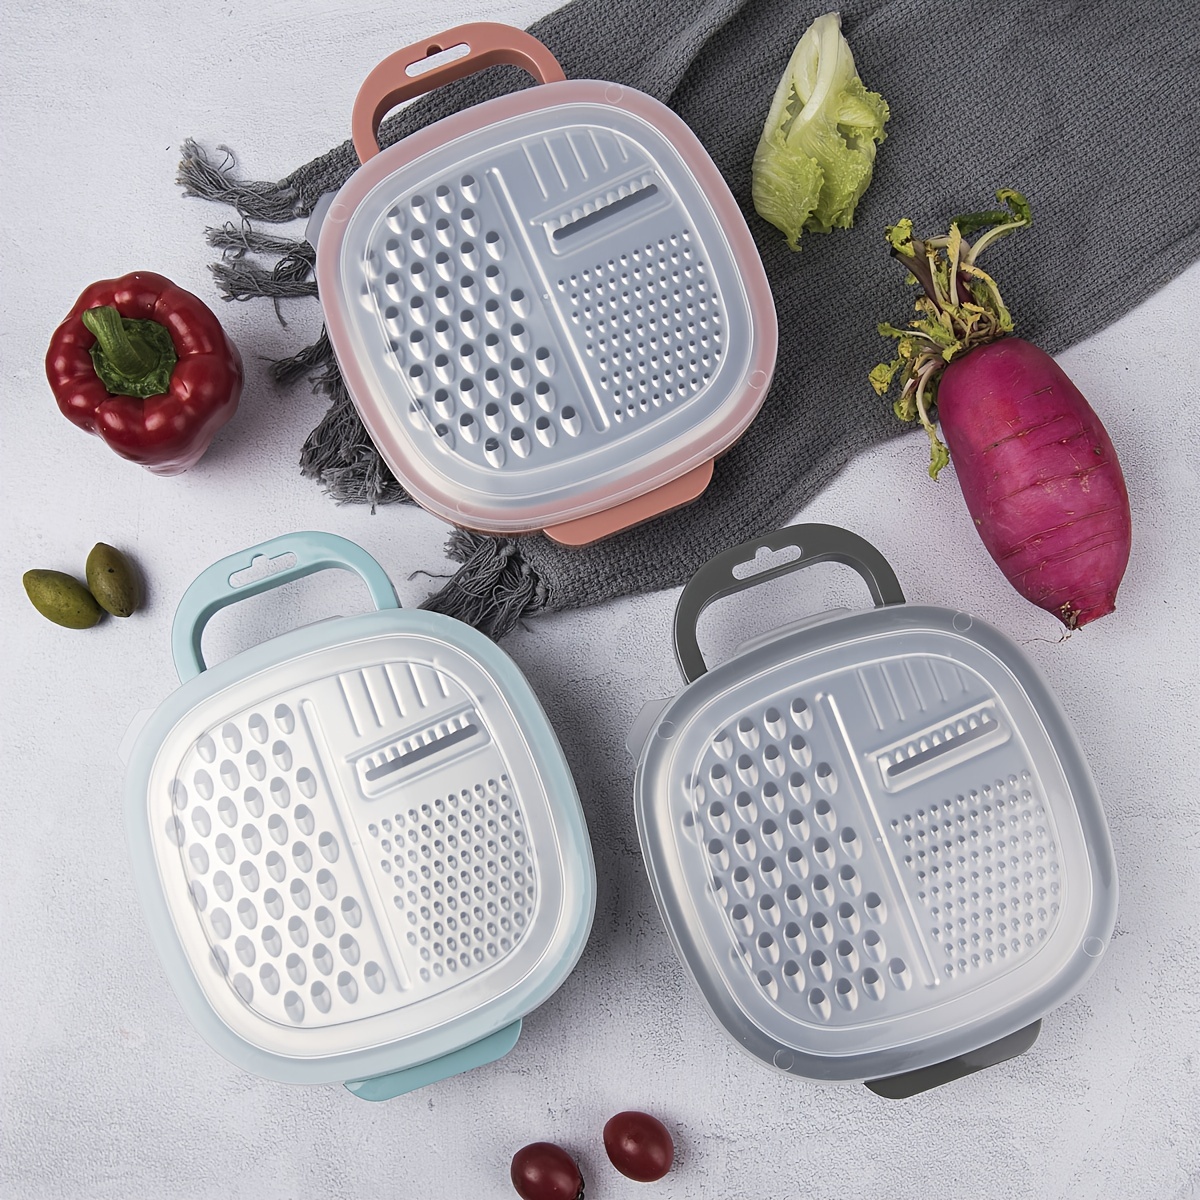 Flat Fine Cheese Grater with Plastic Handle